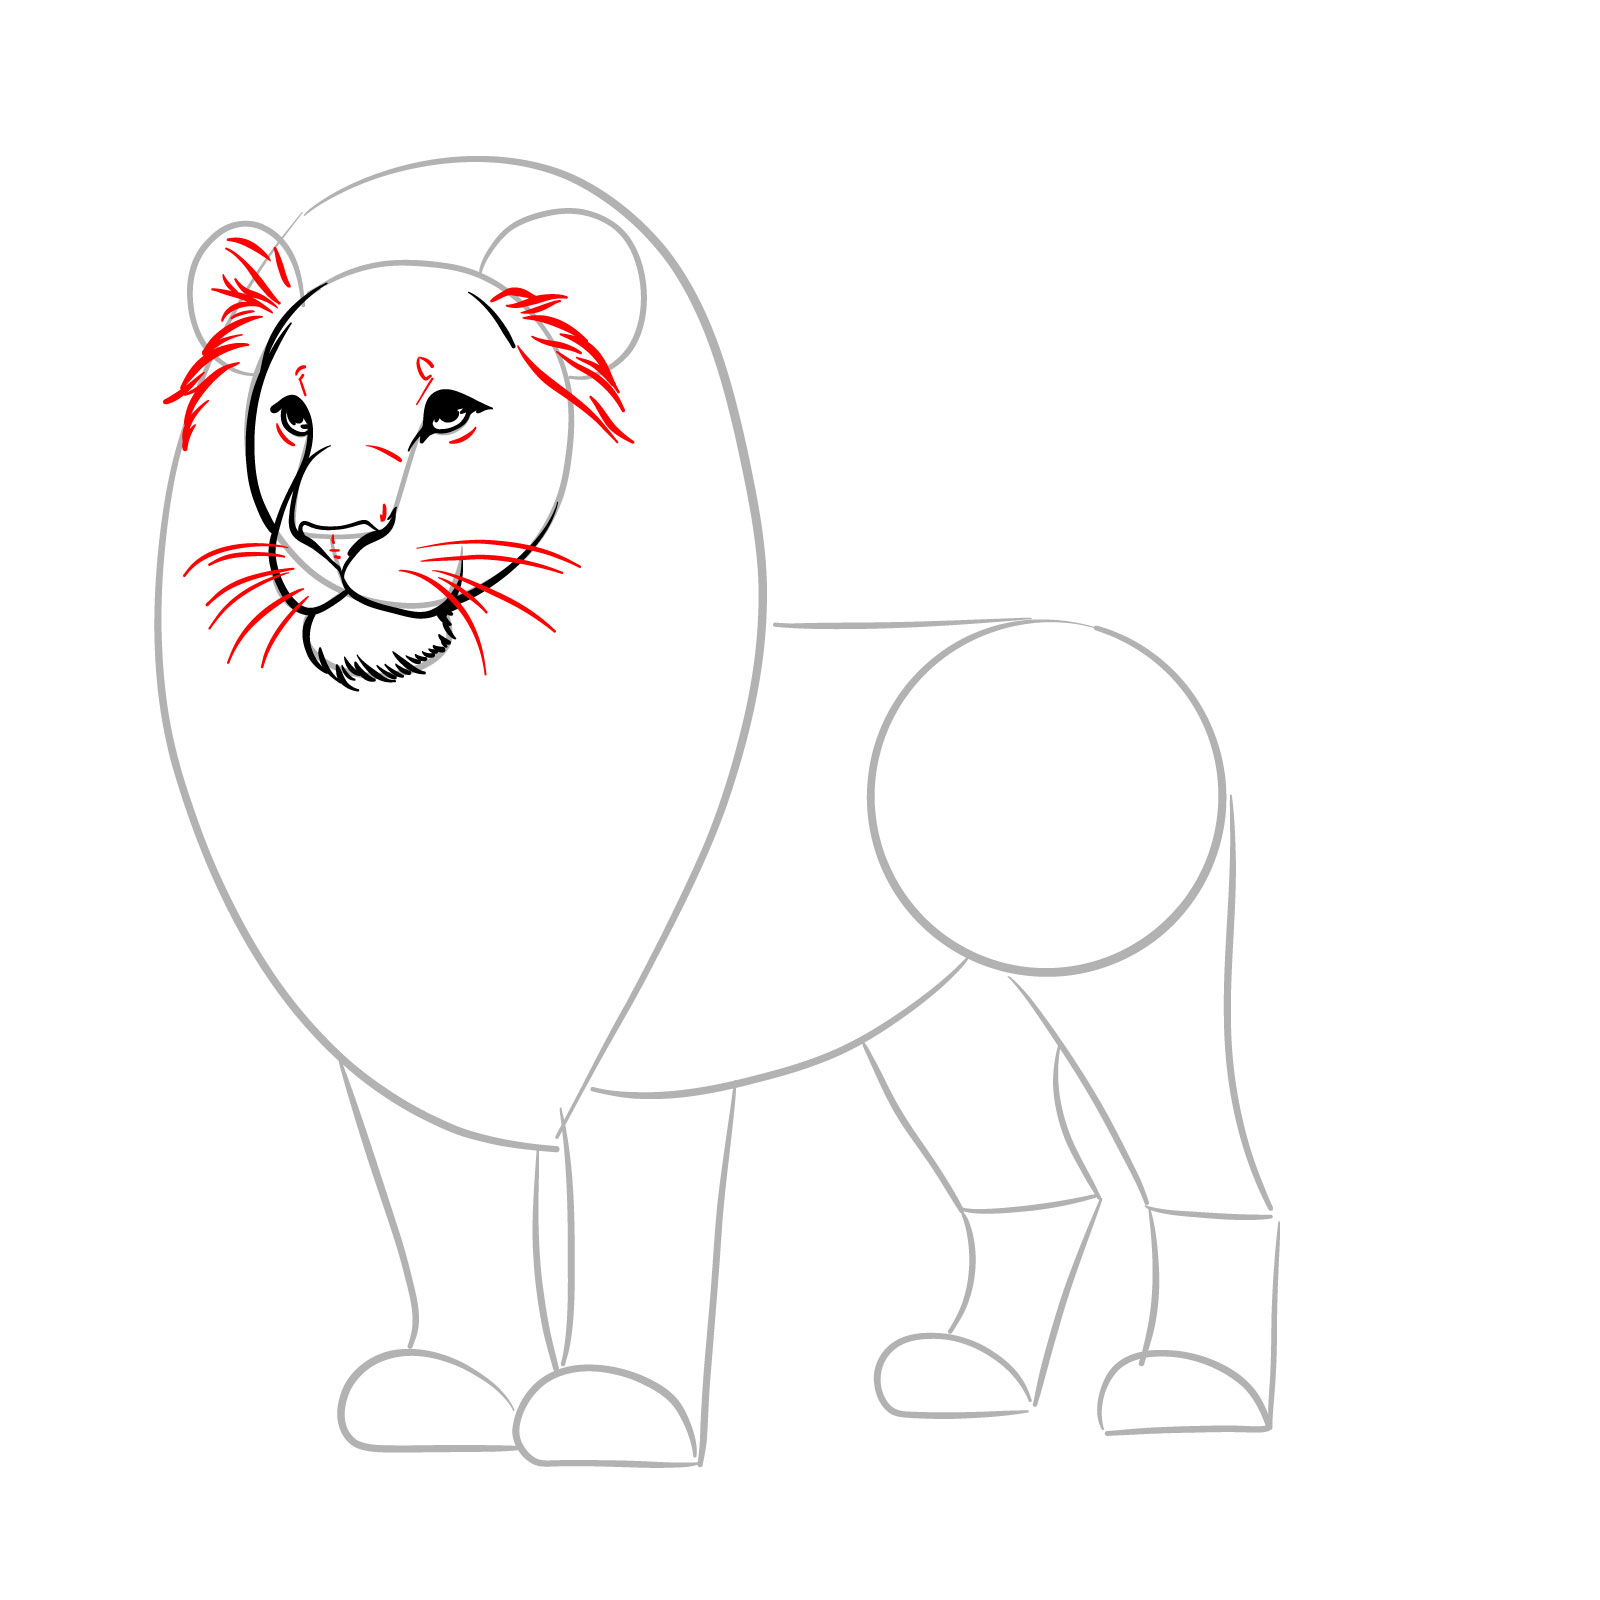 Lion with facial details and ear fur - step 06